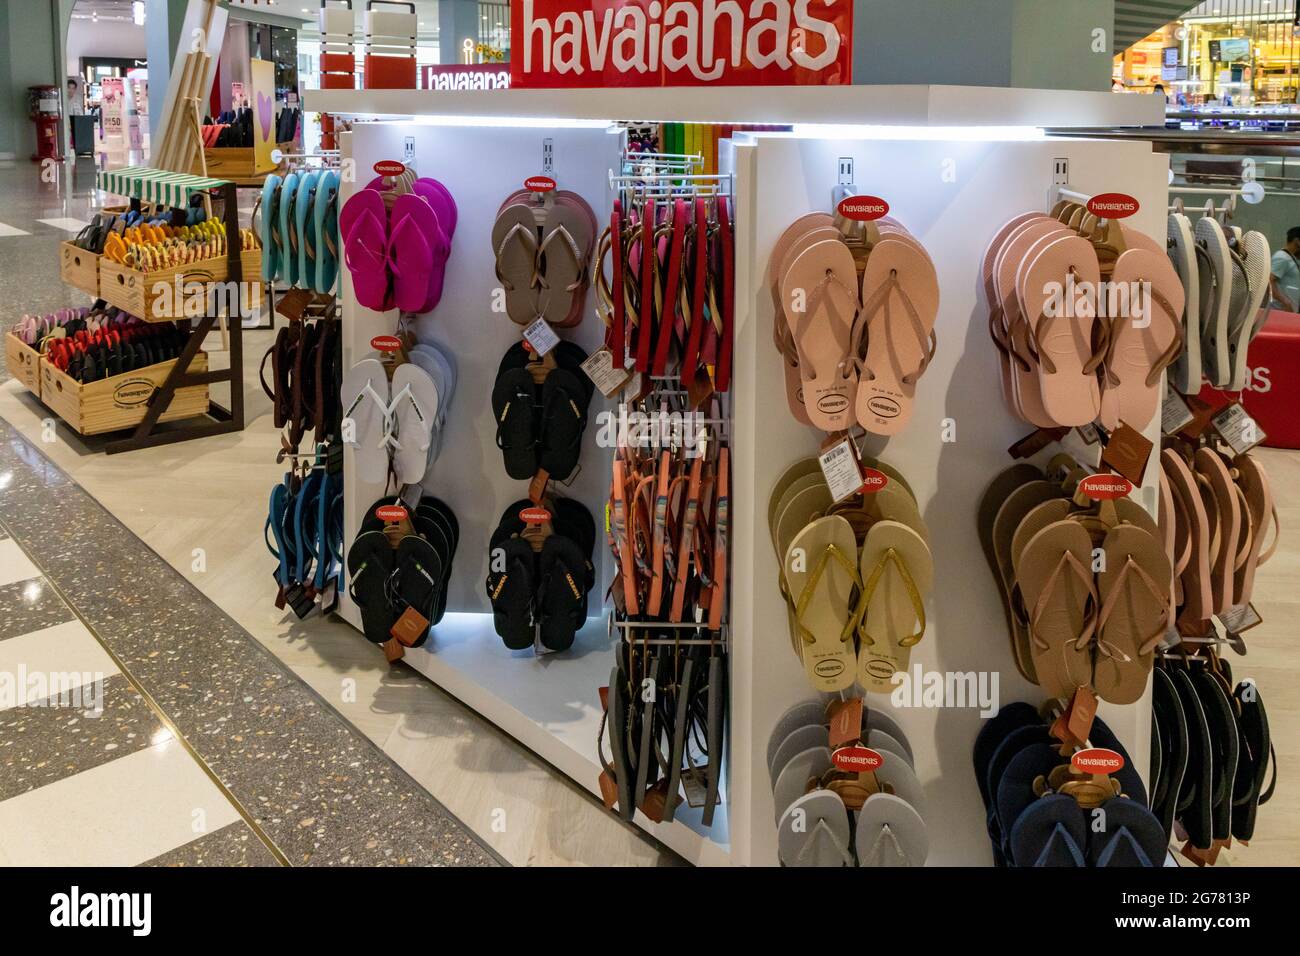 Havaianas store in shopping mall in Phuket, Thailand Stock Photo